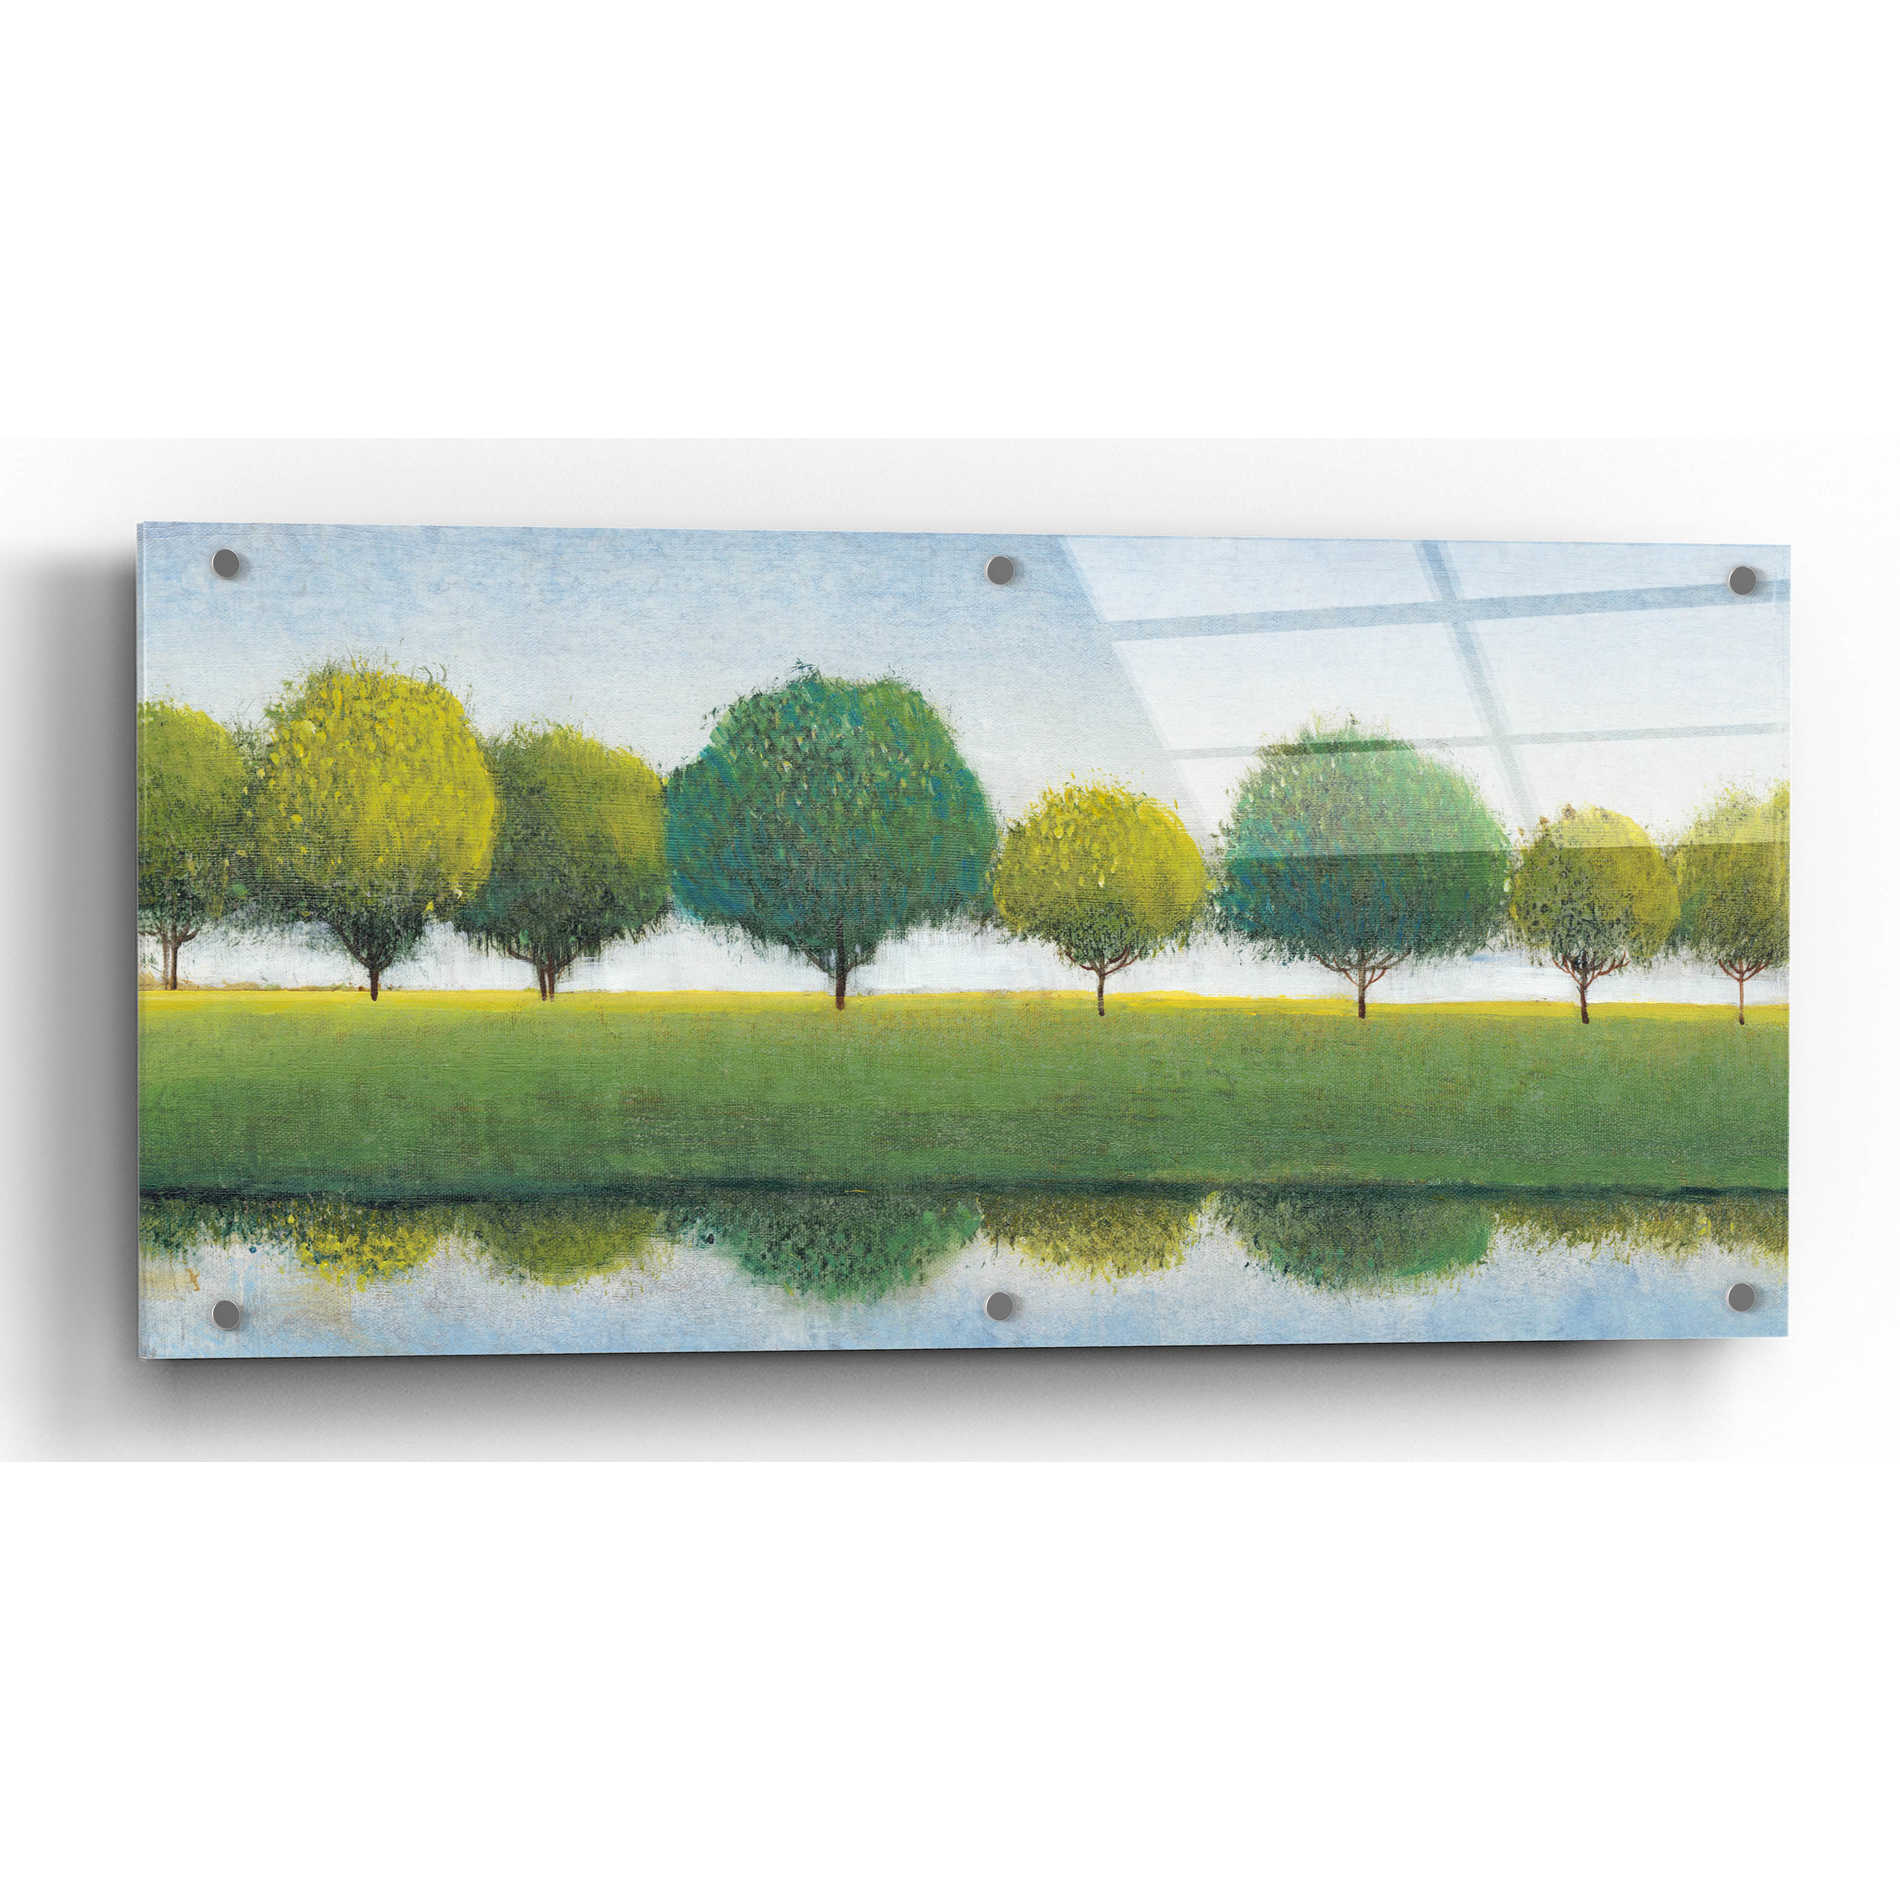 Epic Art 'Trees in a Line I' by Tim O'Toole, Acrylic Glass Wall Art,2:1